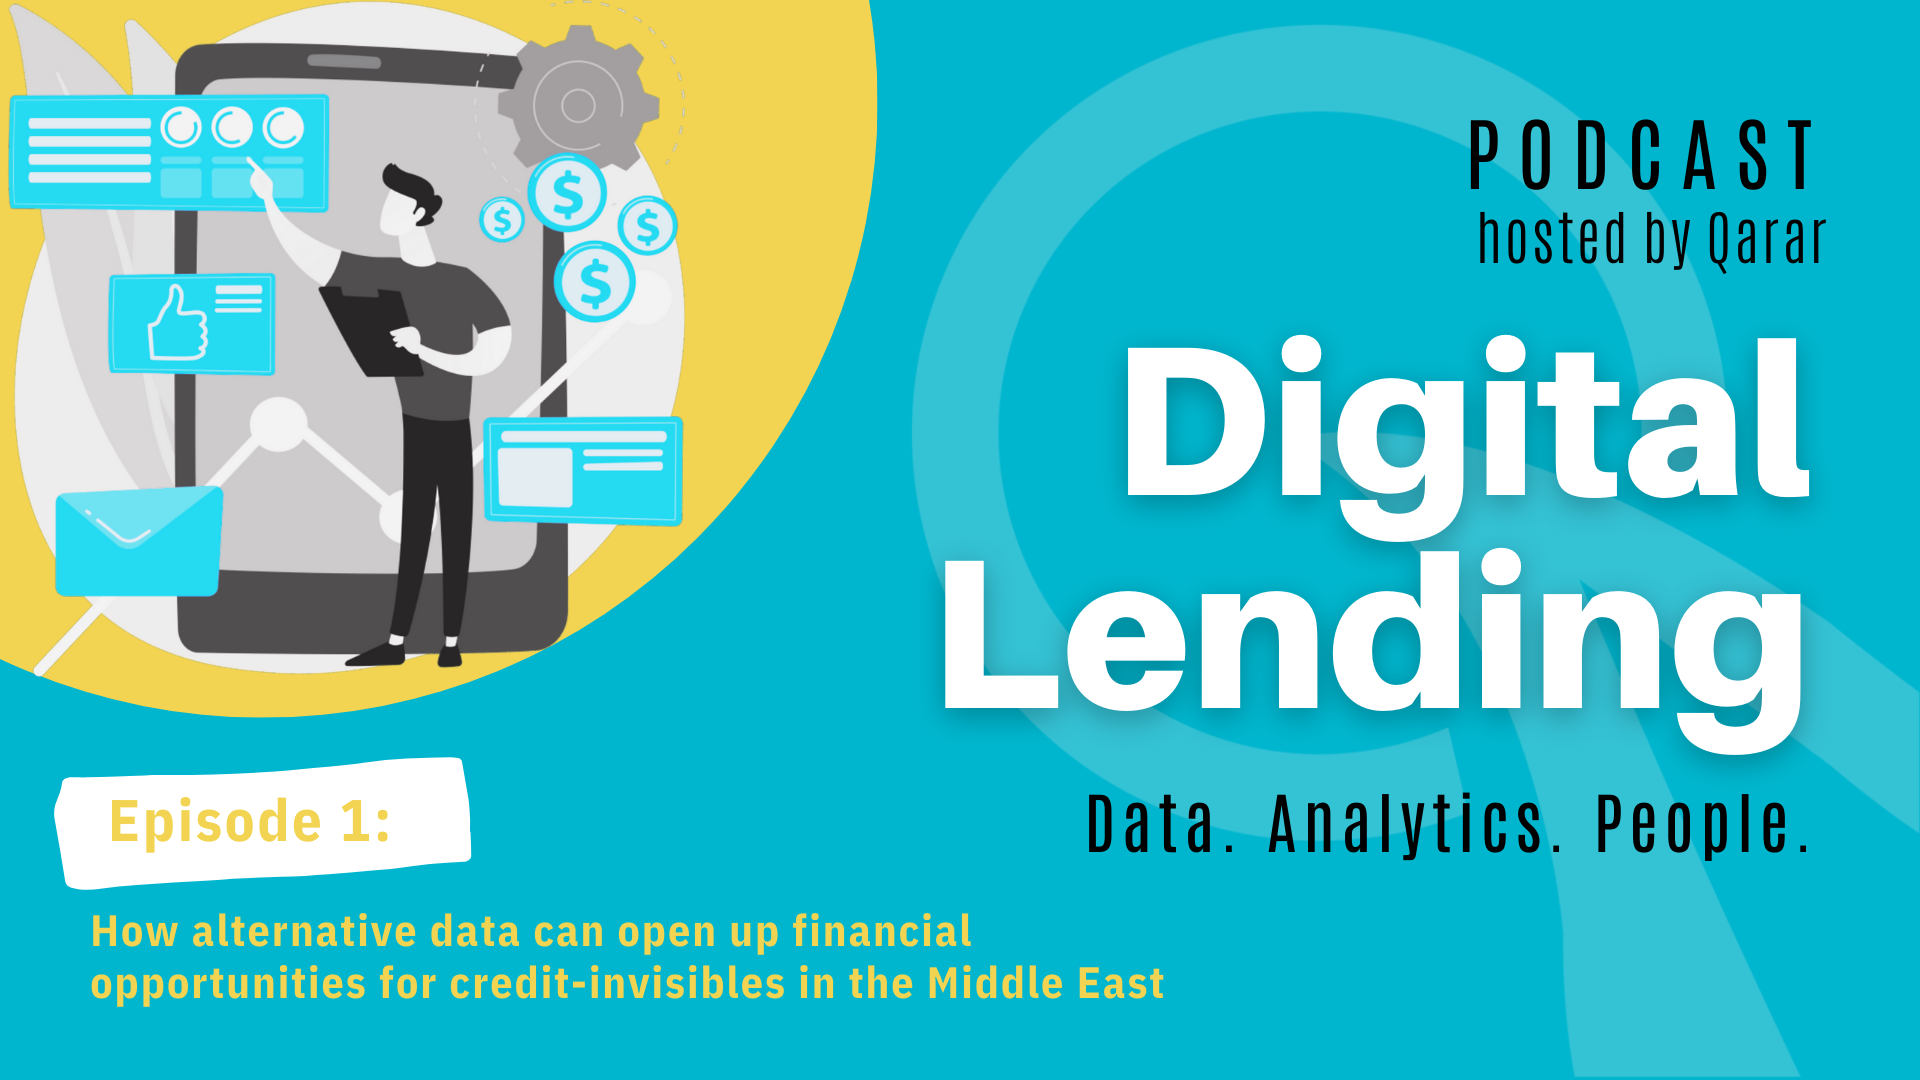  PODCAST Episode 1 — How alternative data can open up financial opportunities for credit-invisibles in the Middle East 